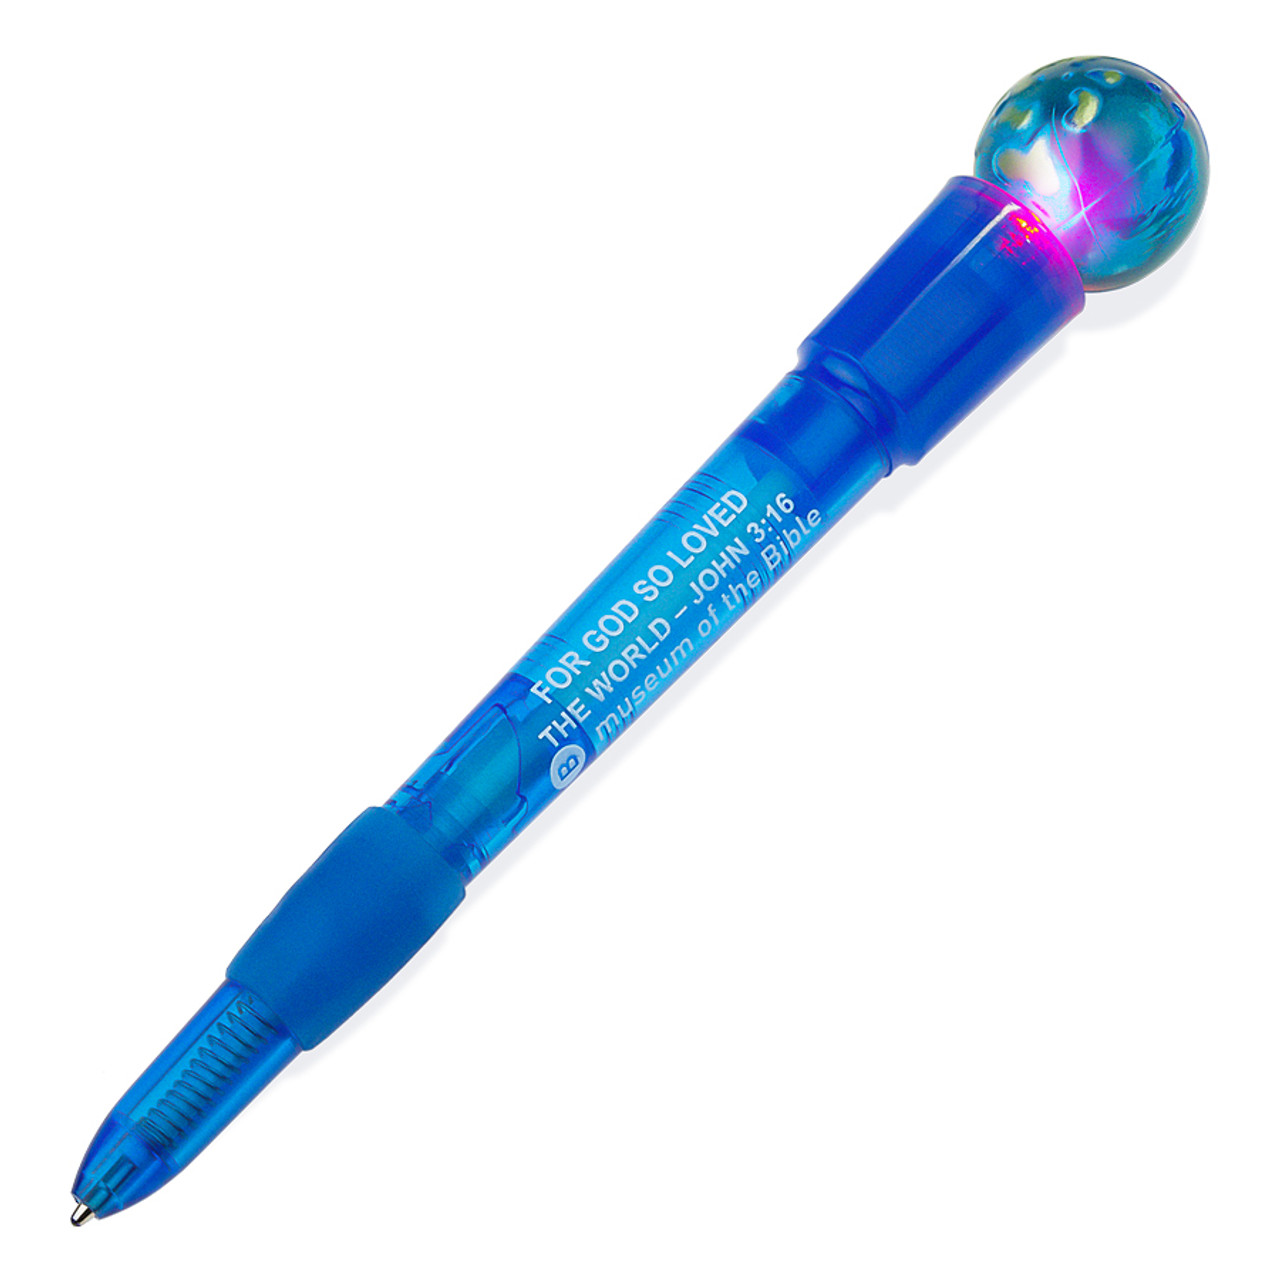 So Loved the World MOTB Light Up Pen - Museum of the Bible Store